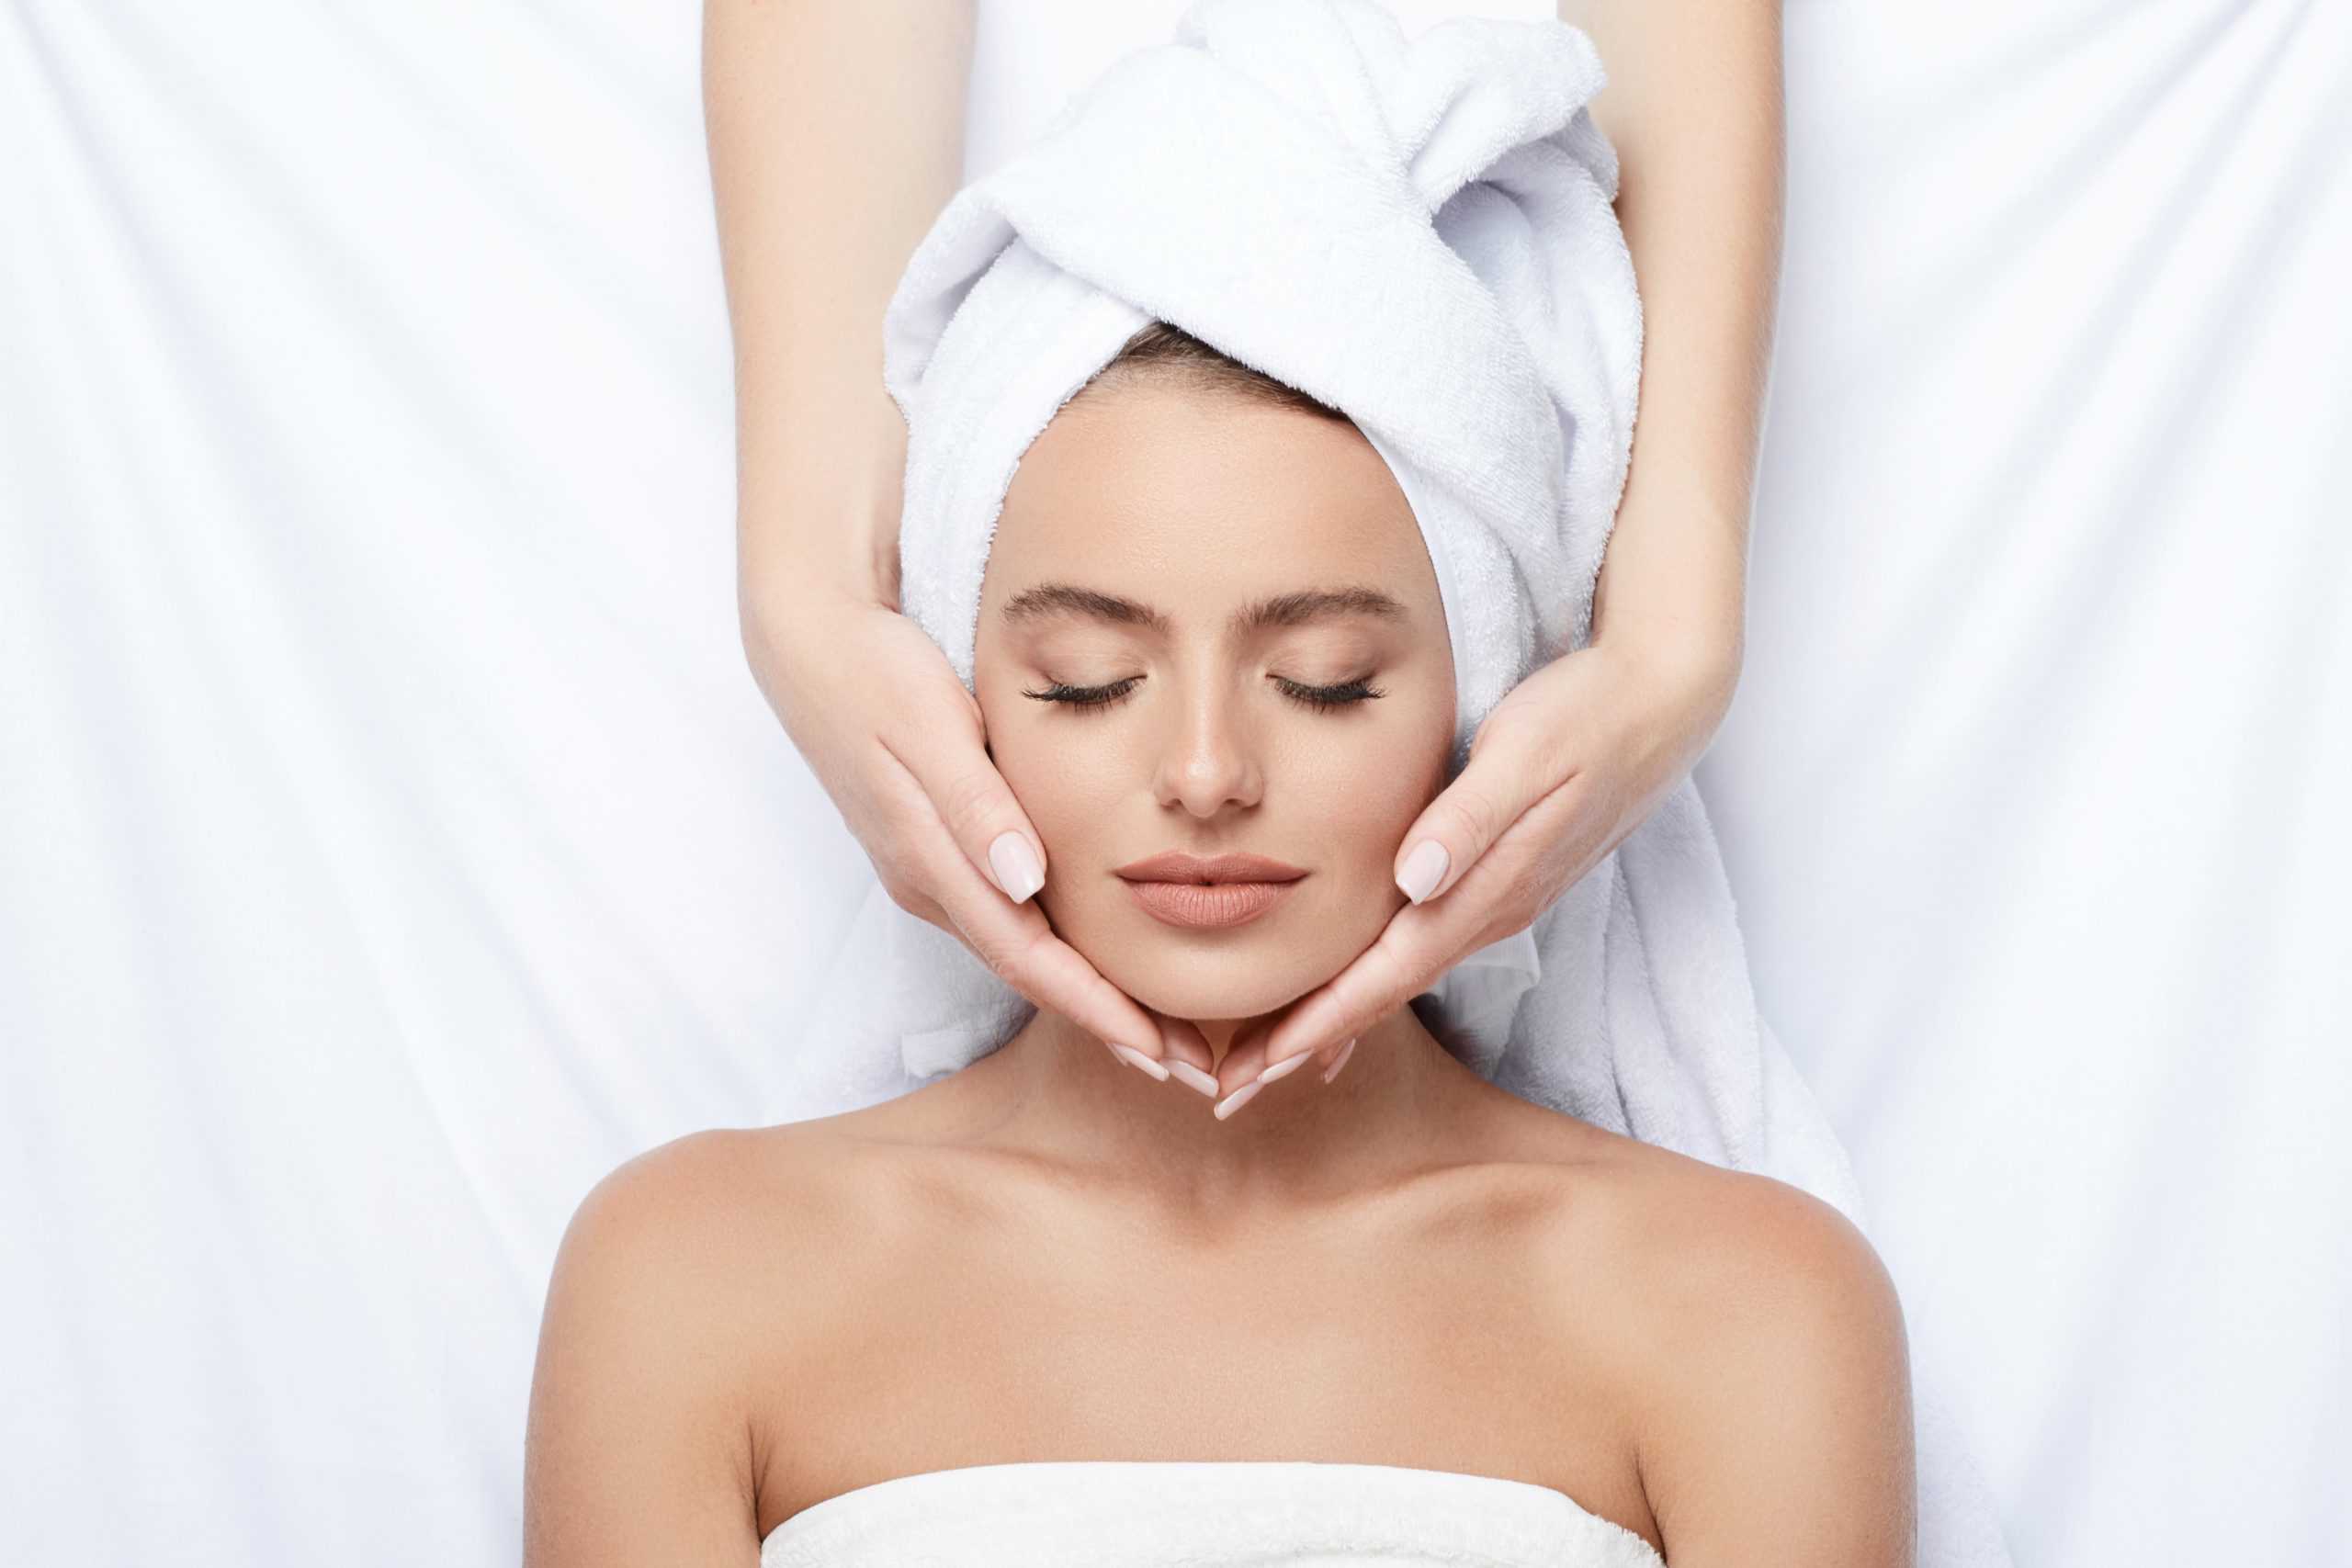 https://montecitomedspa.com/what-is-the-hydrafacial-treatment/